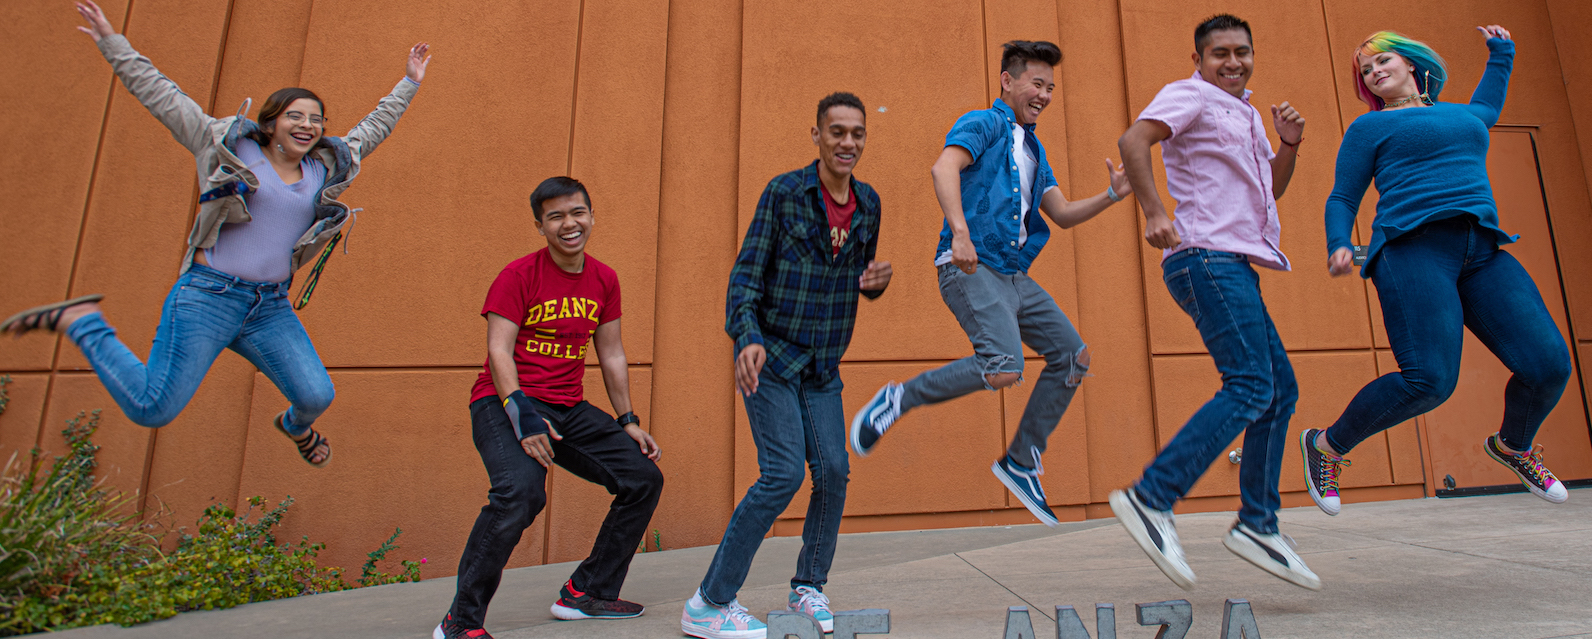 students in a line, some in mid-air